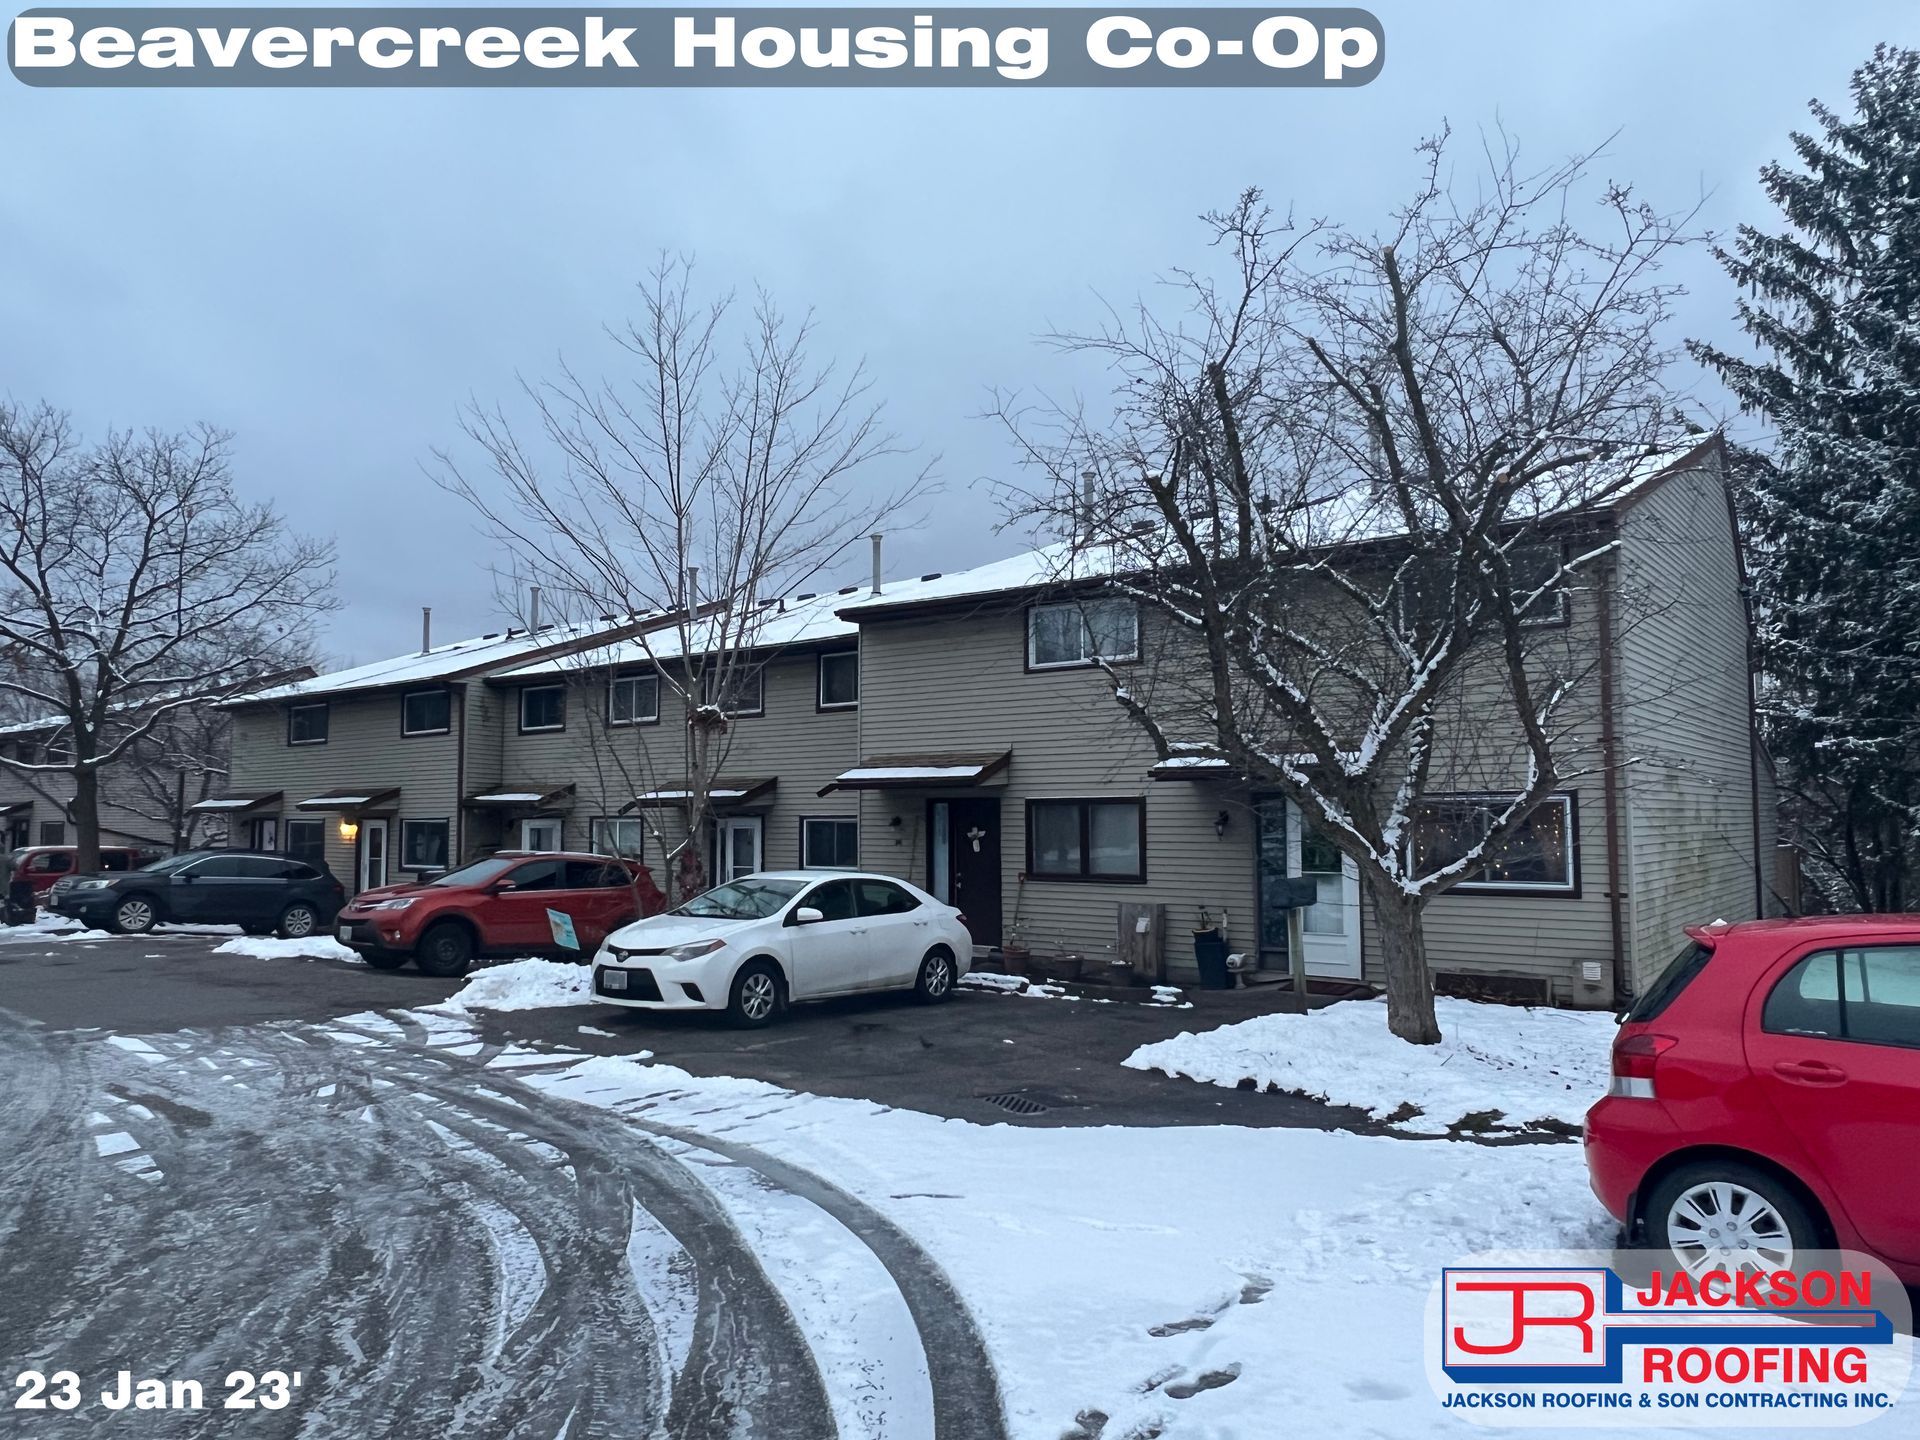 A red car is parked in front of a beavercreek housing co-op